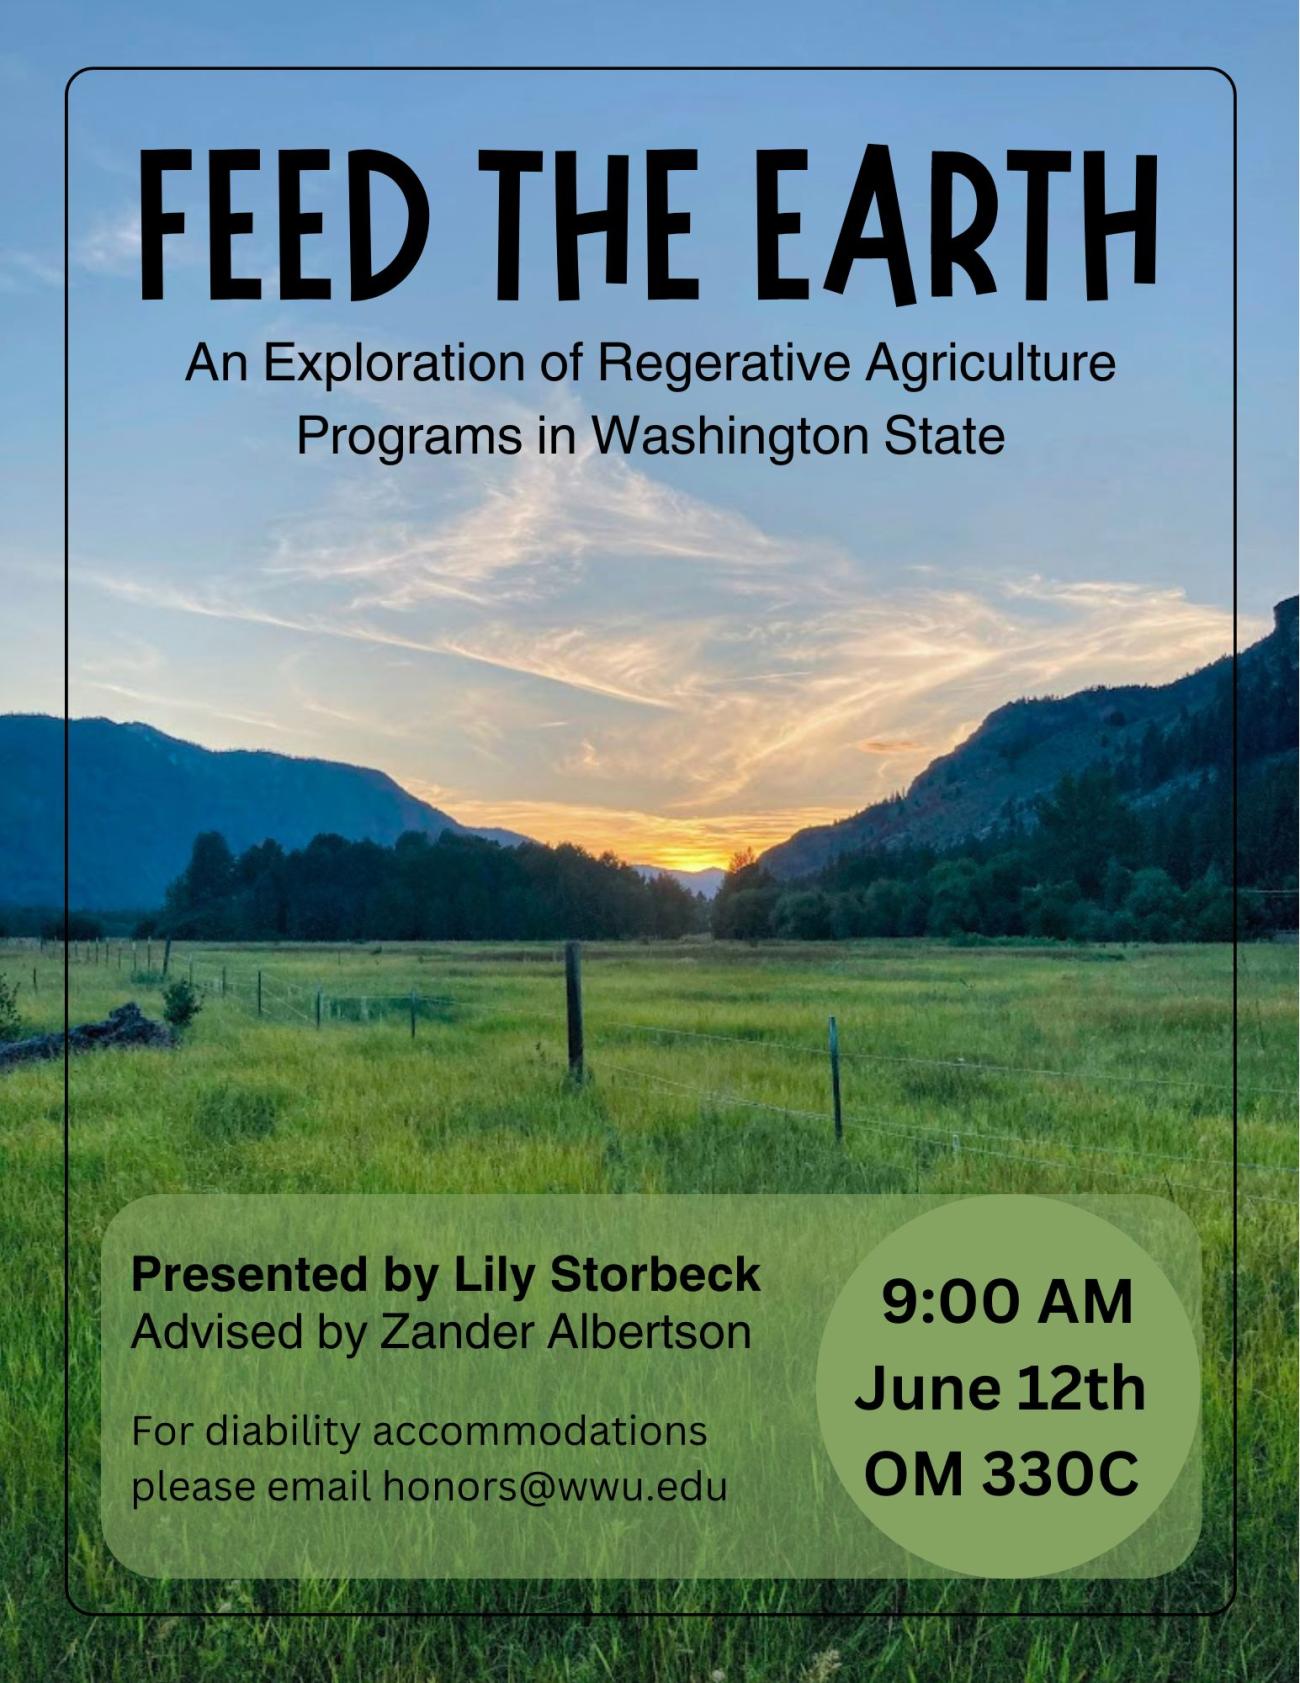 Background is a photo of a green field in the Methow Valley, Washington State. The sun is setting between mountains on both sides of the field. Text reads “Feed the Earth: An Exploration of Regenerative Agriculture Programs in Washington State. Presented by Lily Storbeck, Advised by Zander Albertson. 9:00 AM, June 12th, OM 330C. For disability accommodations please email honors@wwu.edu”.